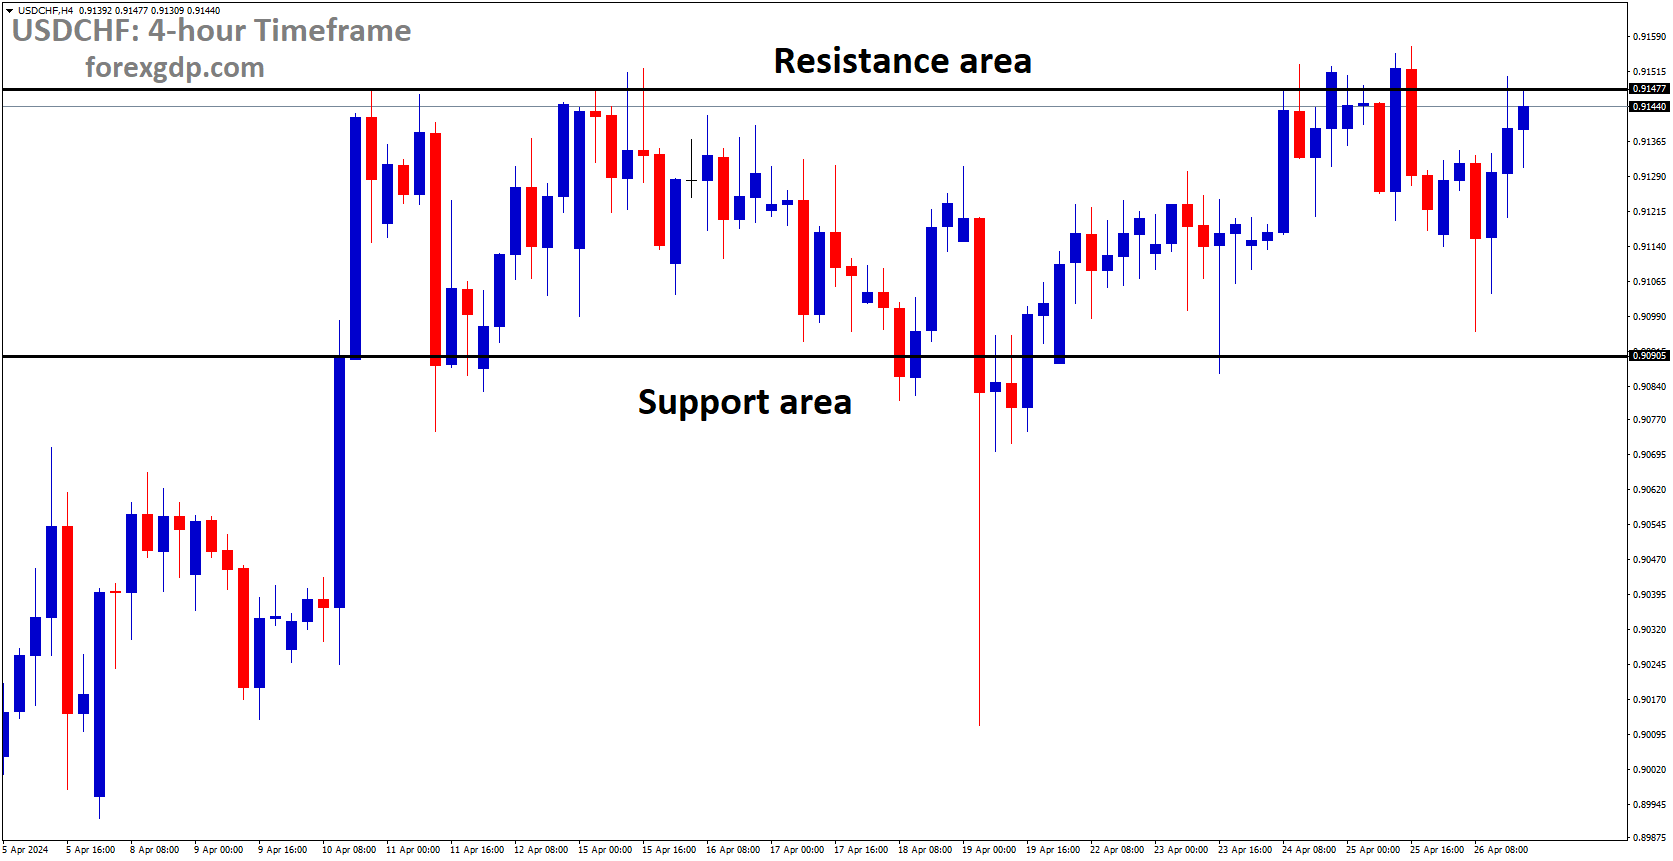 USDCHF is moving in box pattern and market has reached resistance area of the pattern